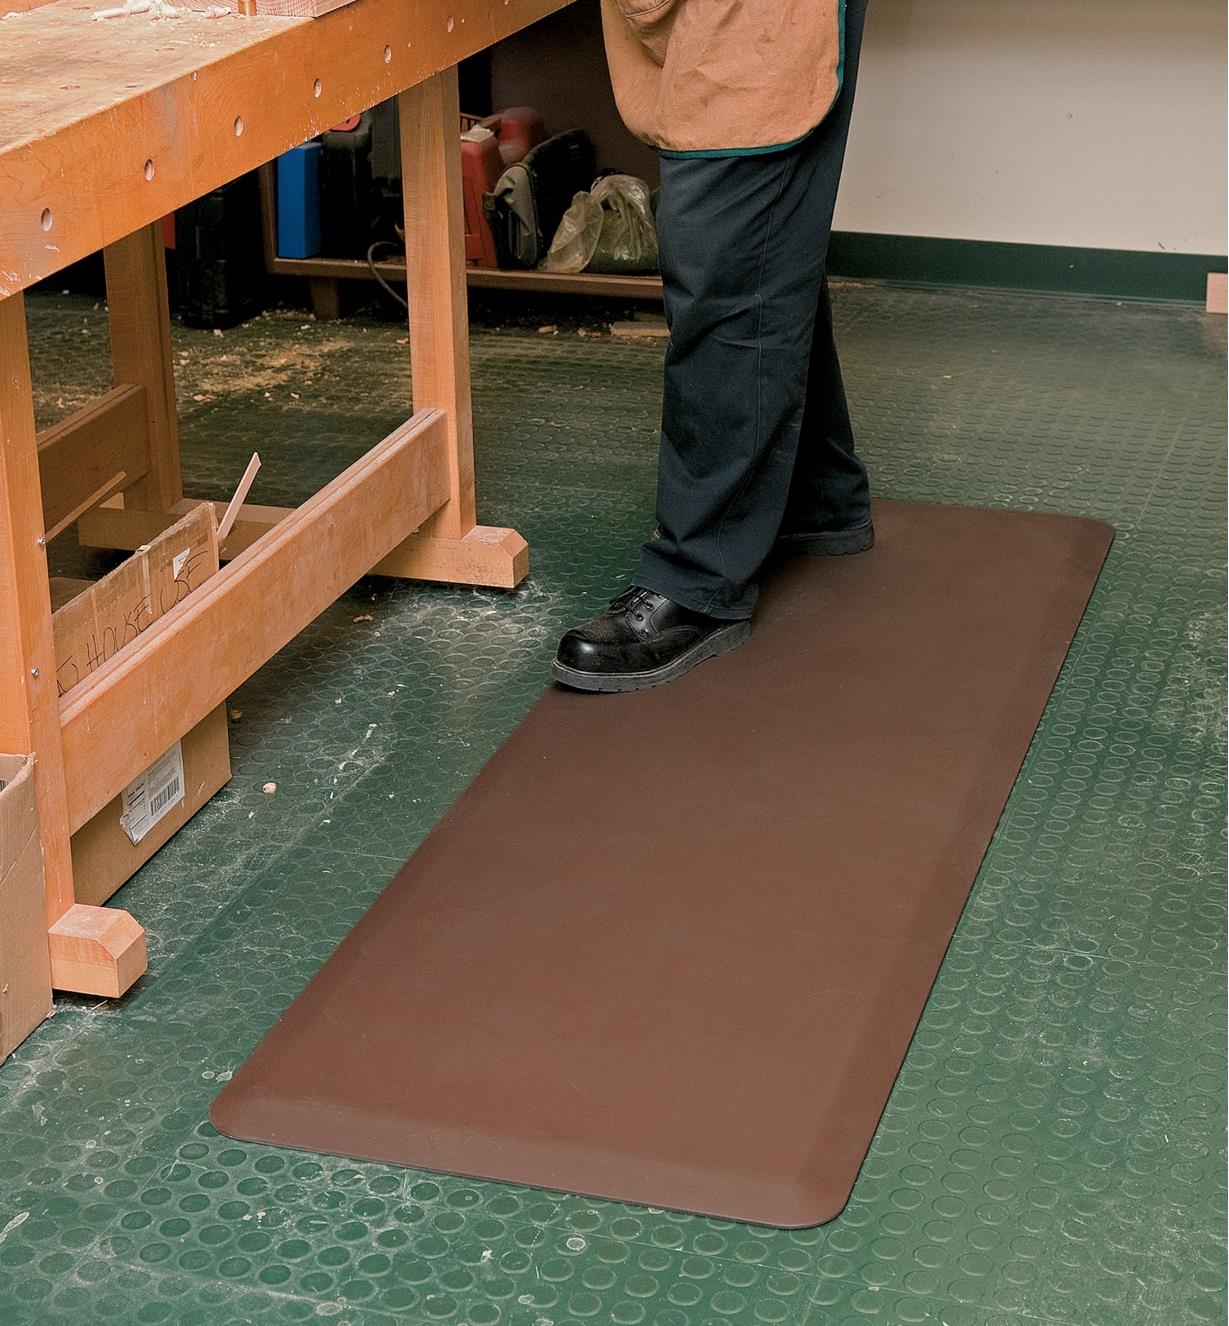 A person stands on a 24" x 72" brown Stationary Mat beside a workbench